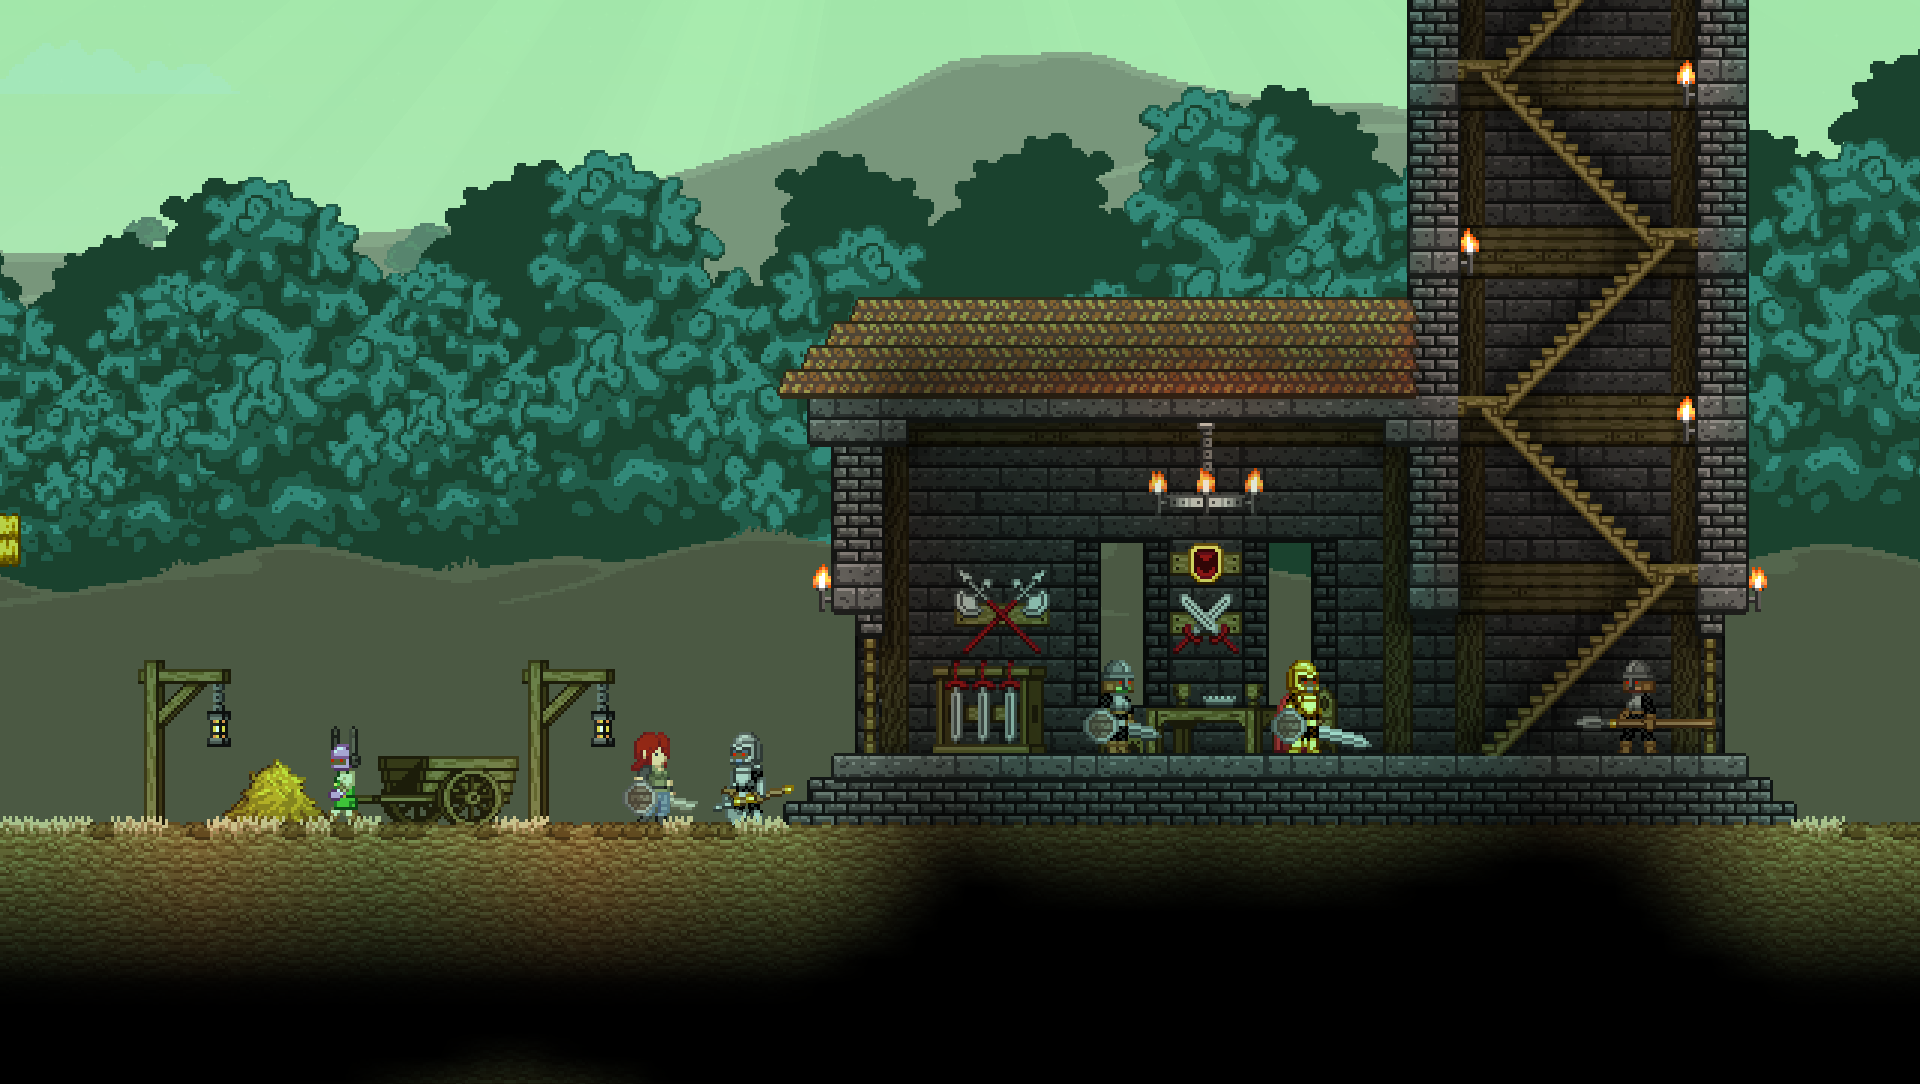 starbound not launching